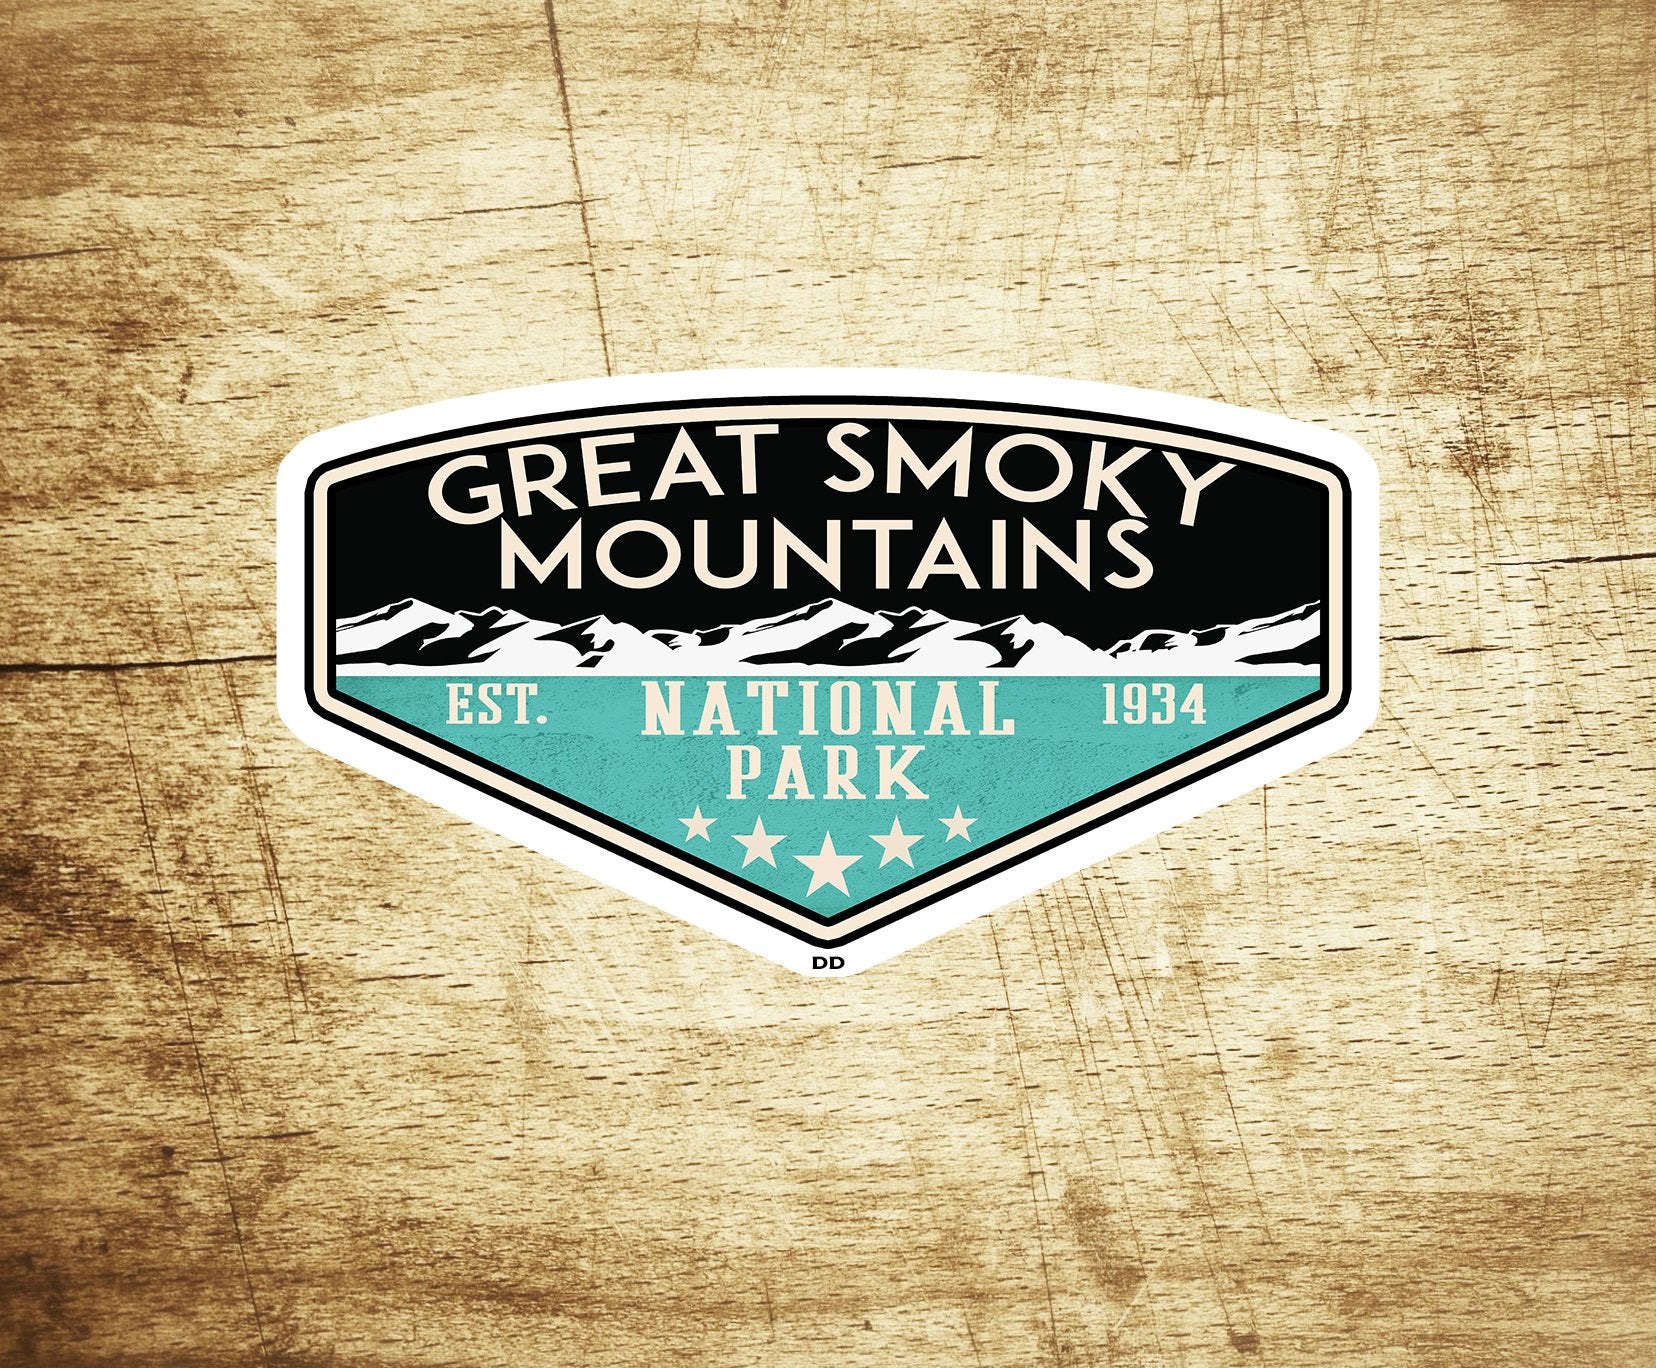 Great Smoky Mountains Decal Sticker Vinyl 3.75" x 2.25" National Park Tennessee